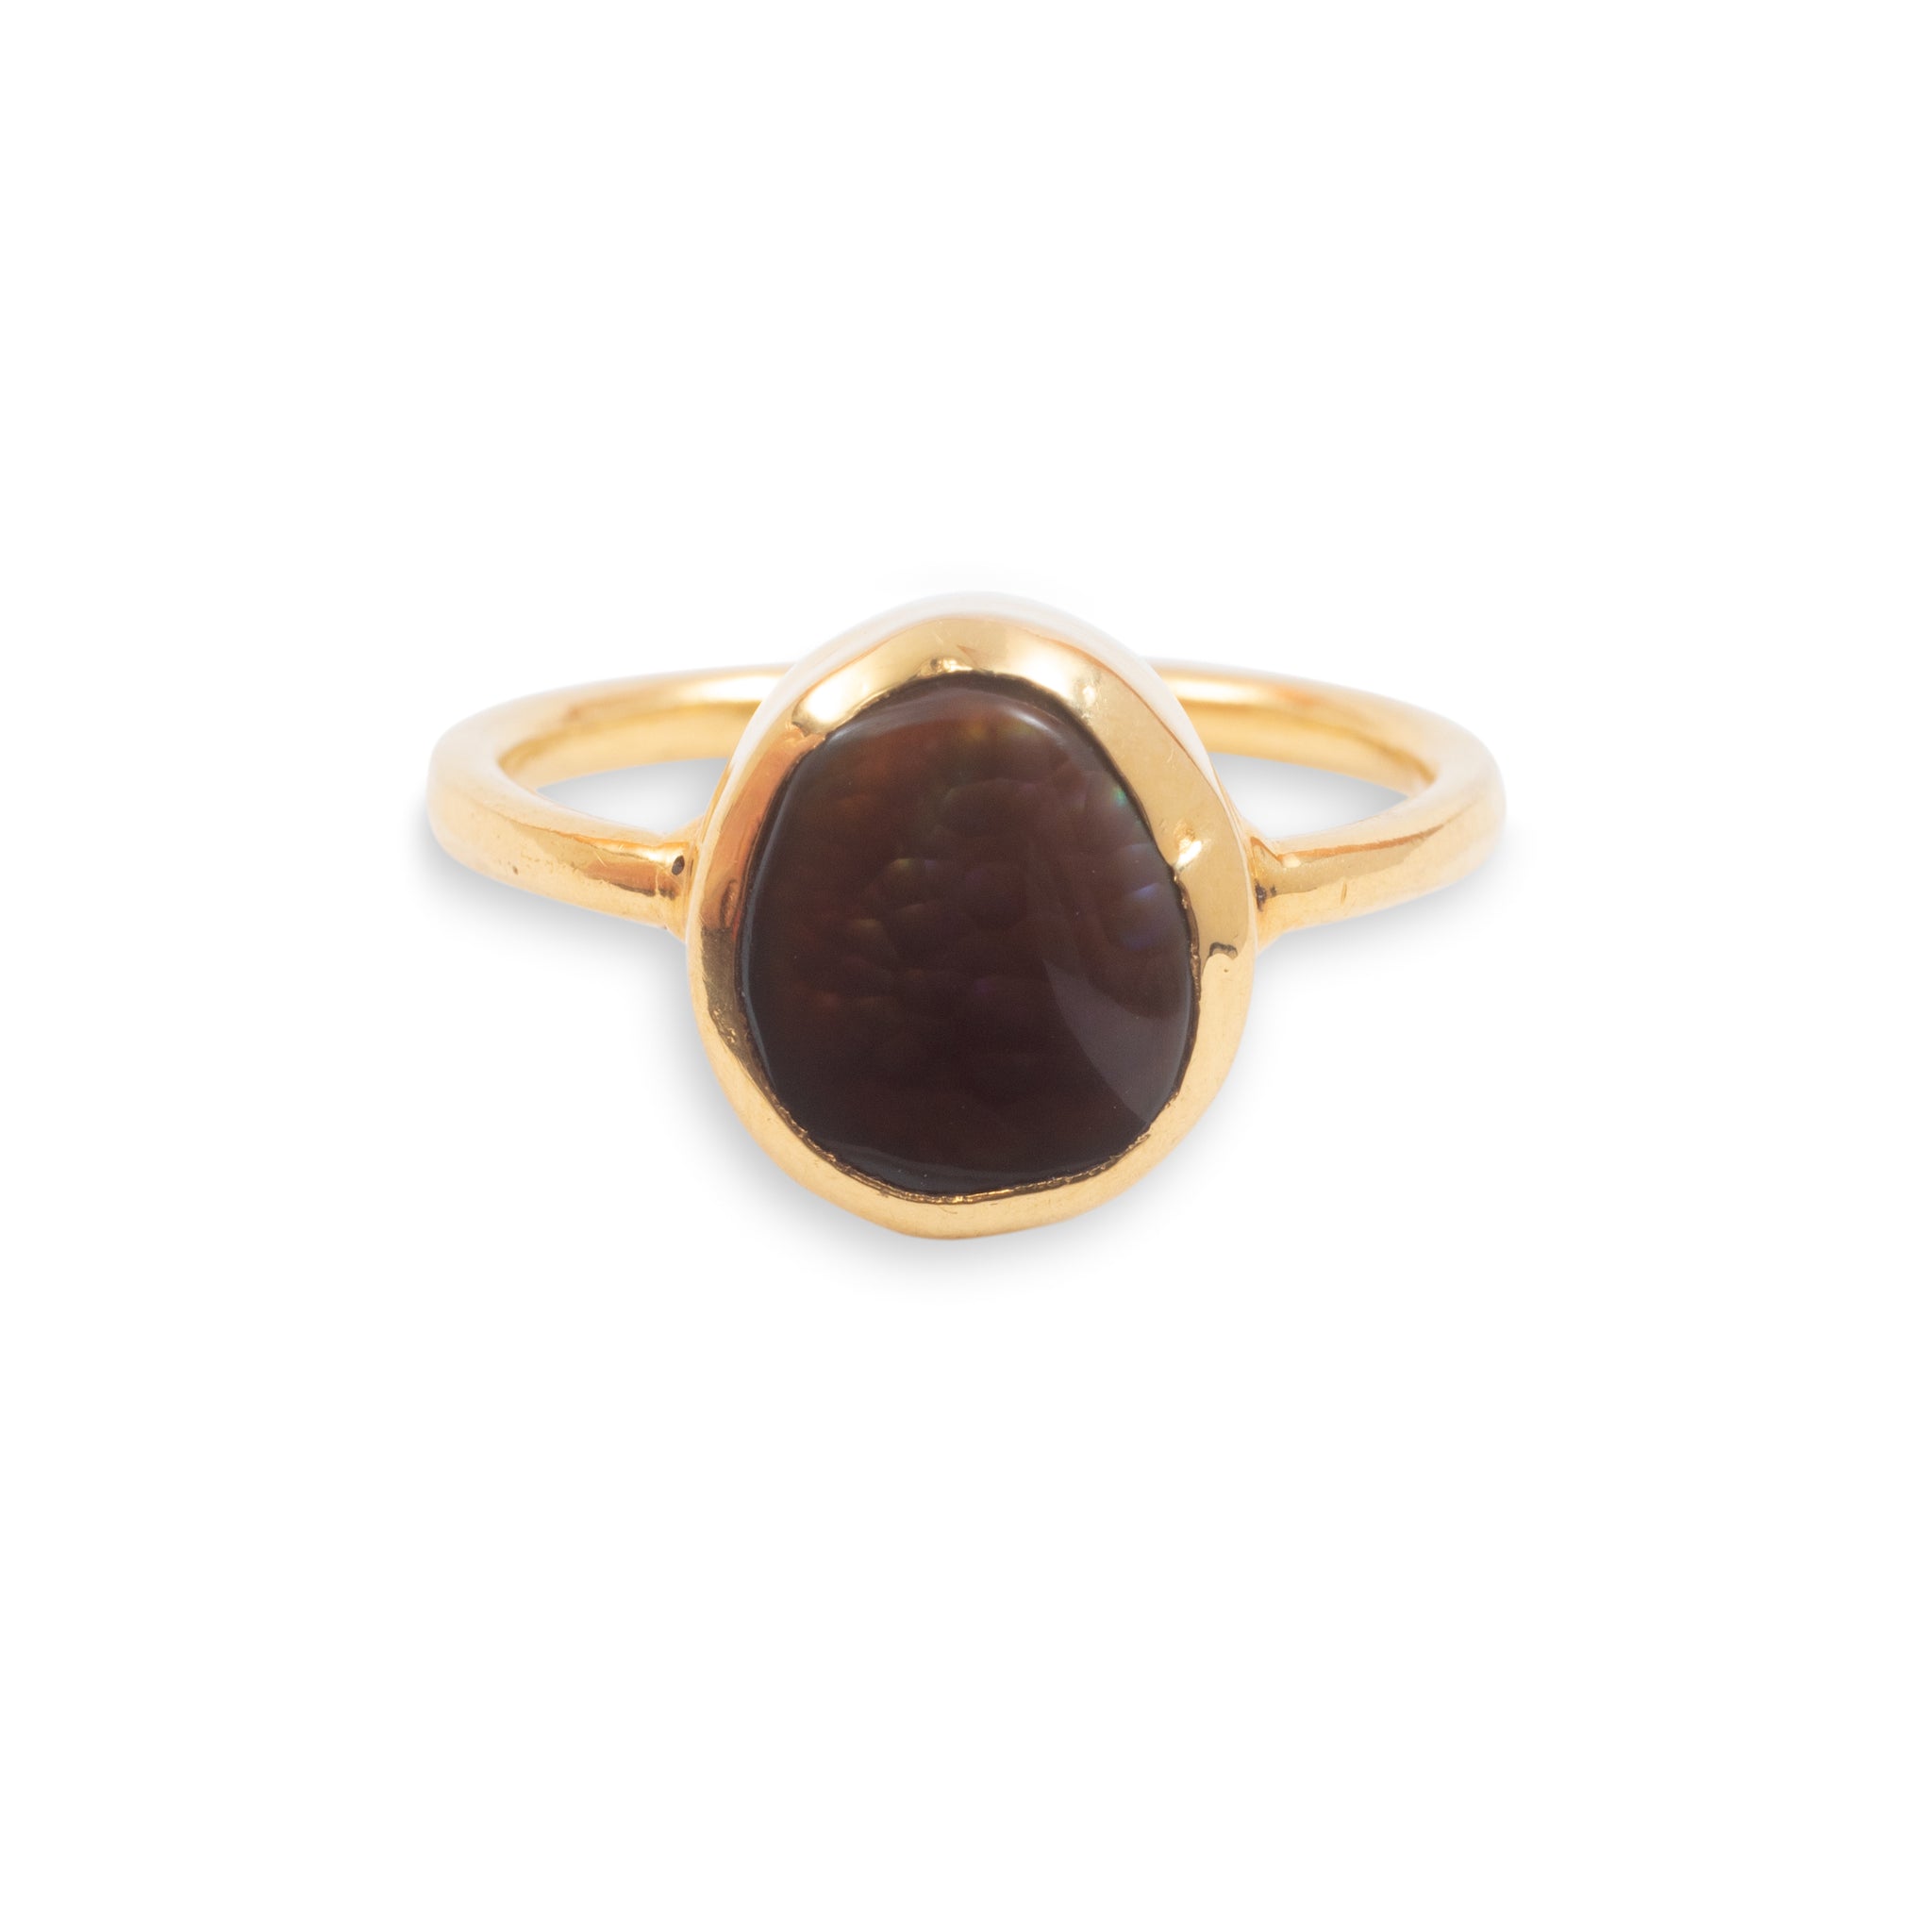 20k gold Mexican Fire Agate Ring